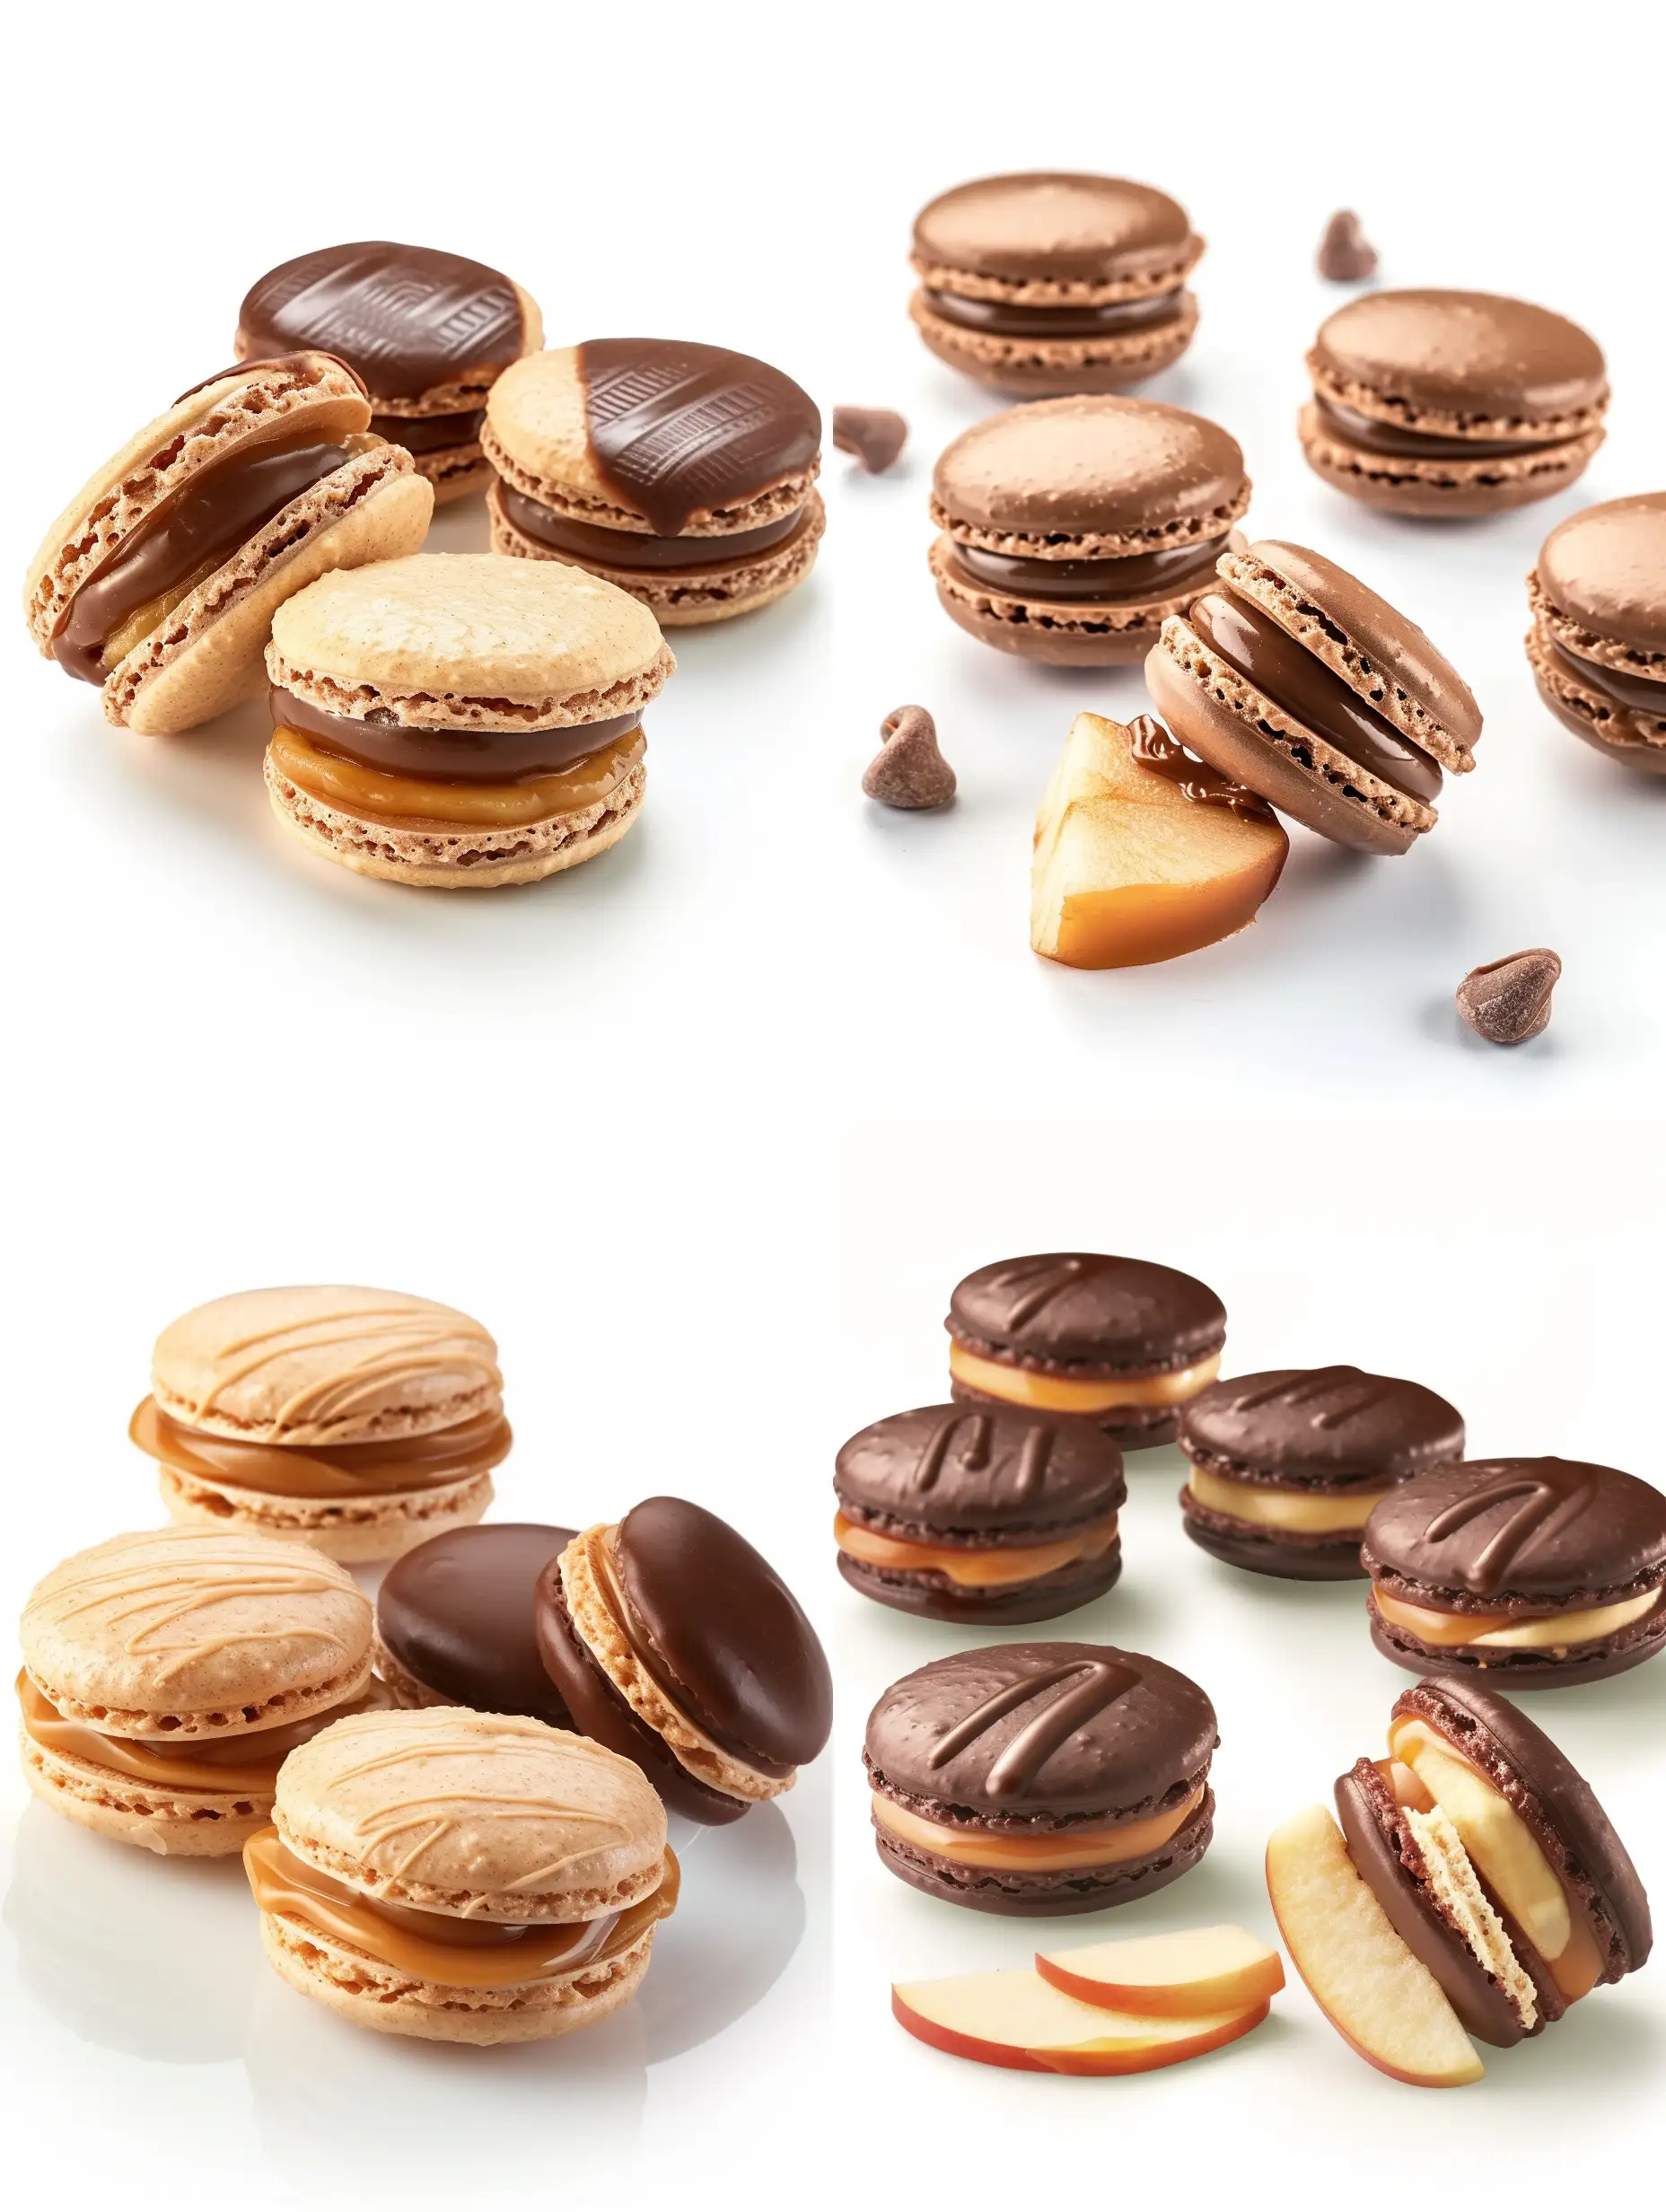 Delicious-Macaroon-Apple-and-Caramel-Chocolate-Treats